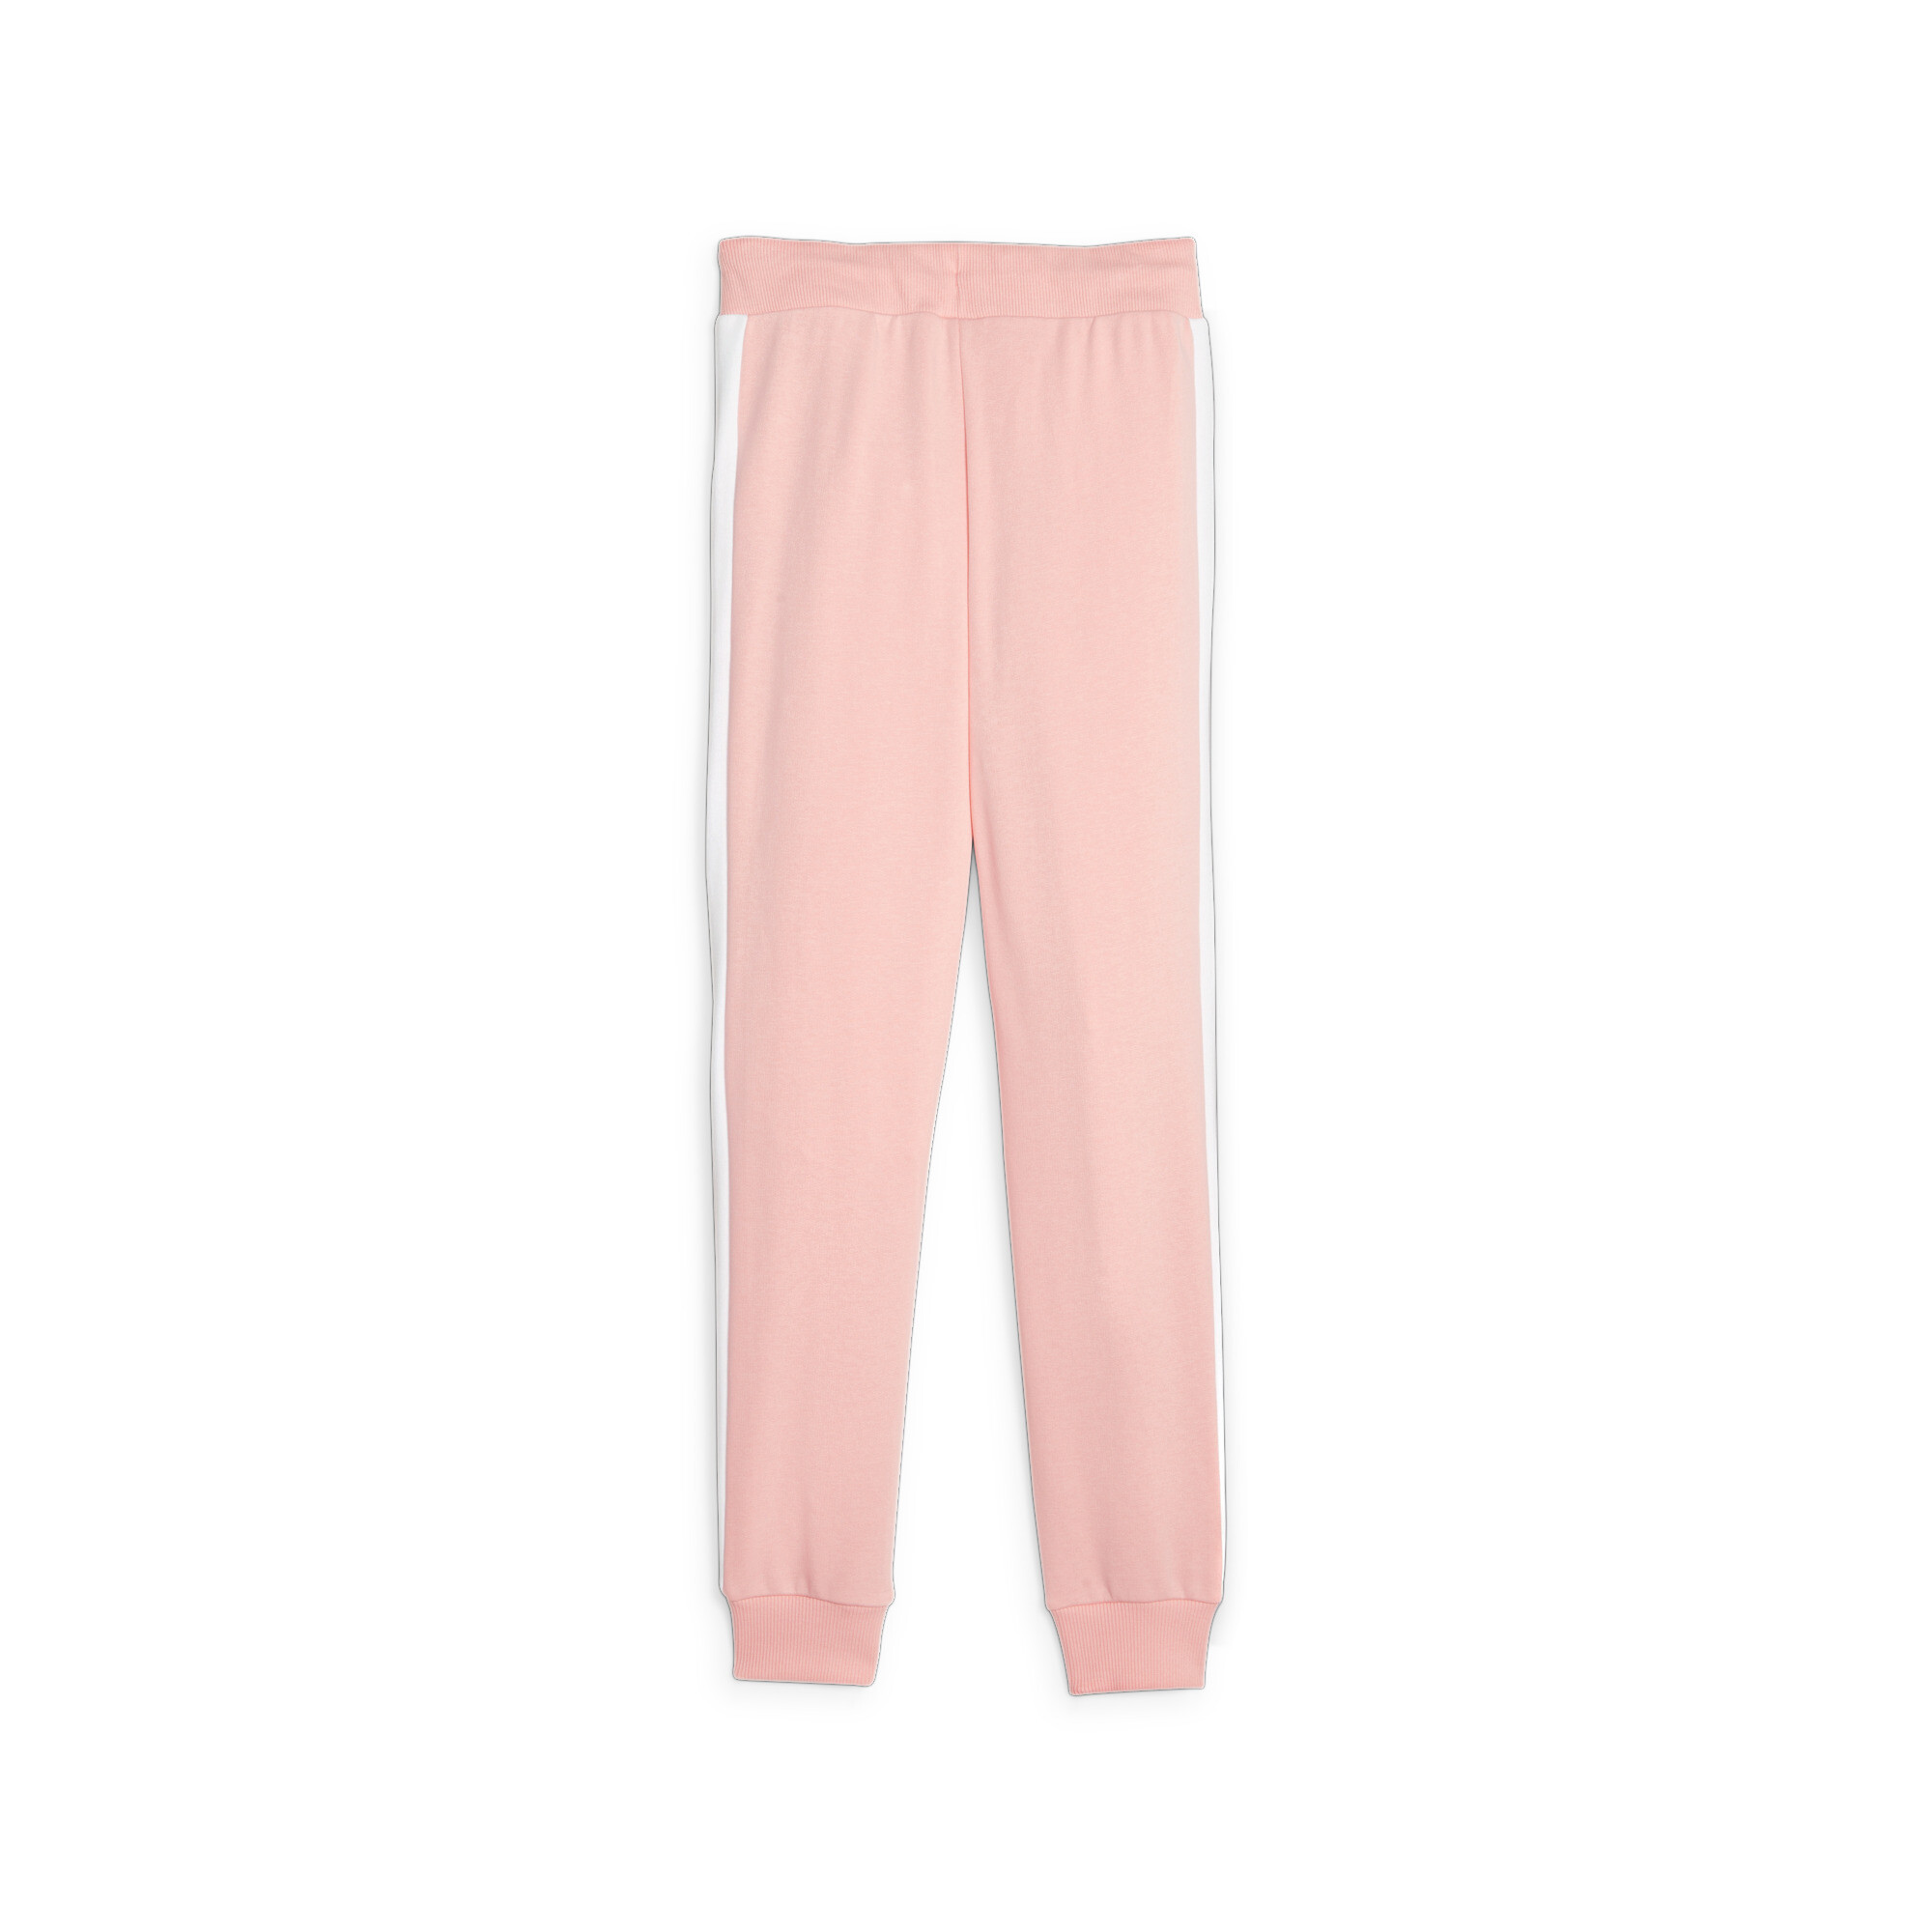 PUMA Classics T7 Track Pants In Pink, Size 9-10 Youth